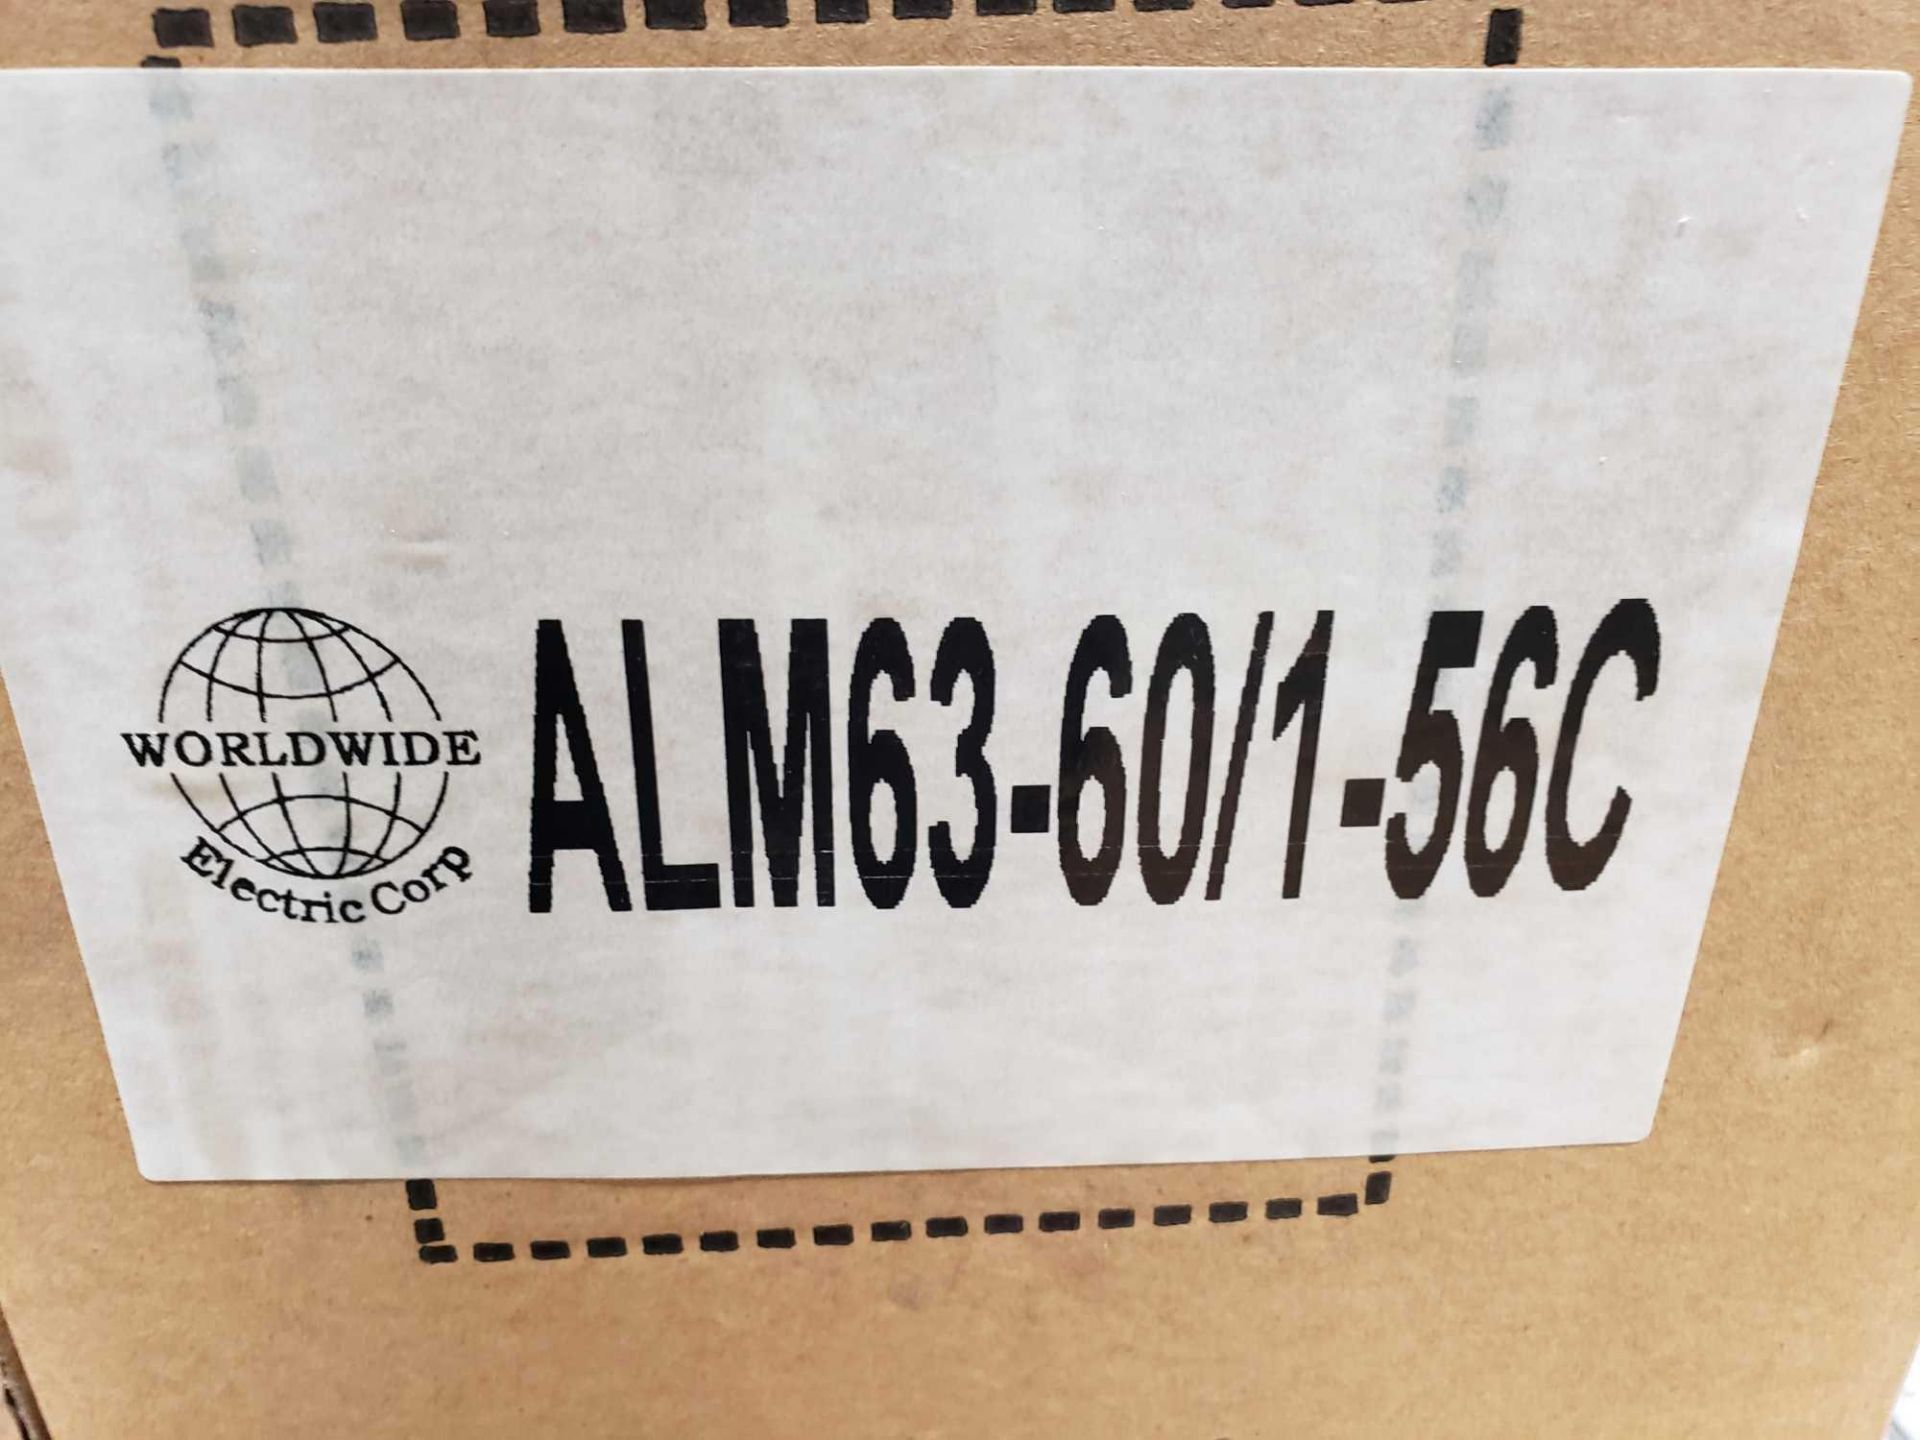 Worldwide Electric Corp model ALM63-60/1-56C gear reducer box. Ratio 60:1. New in box. - Image 2 of 2